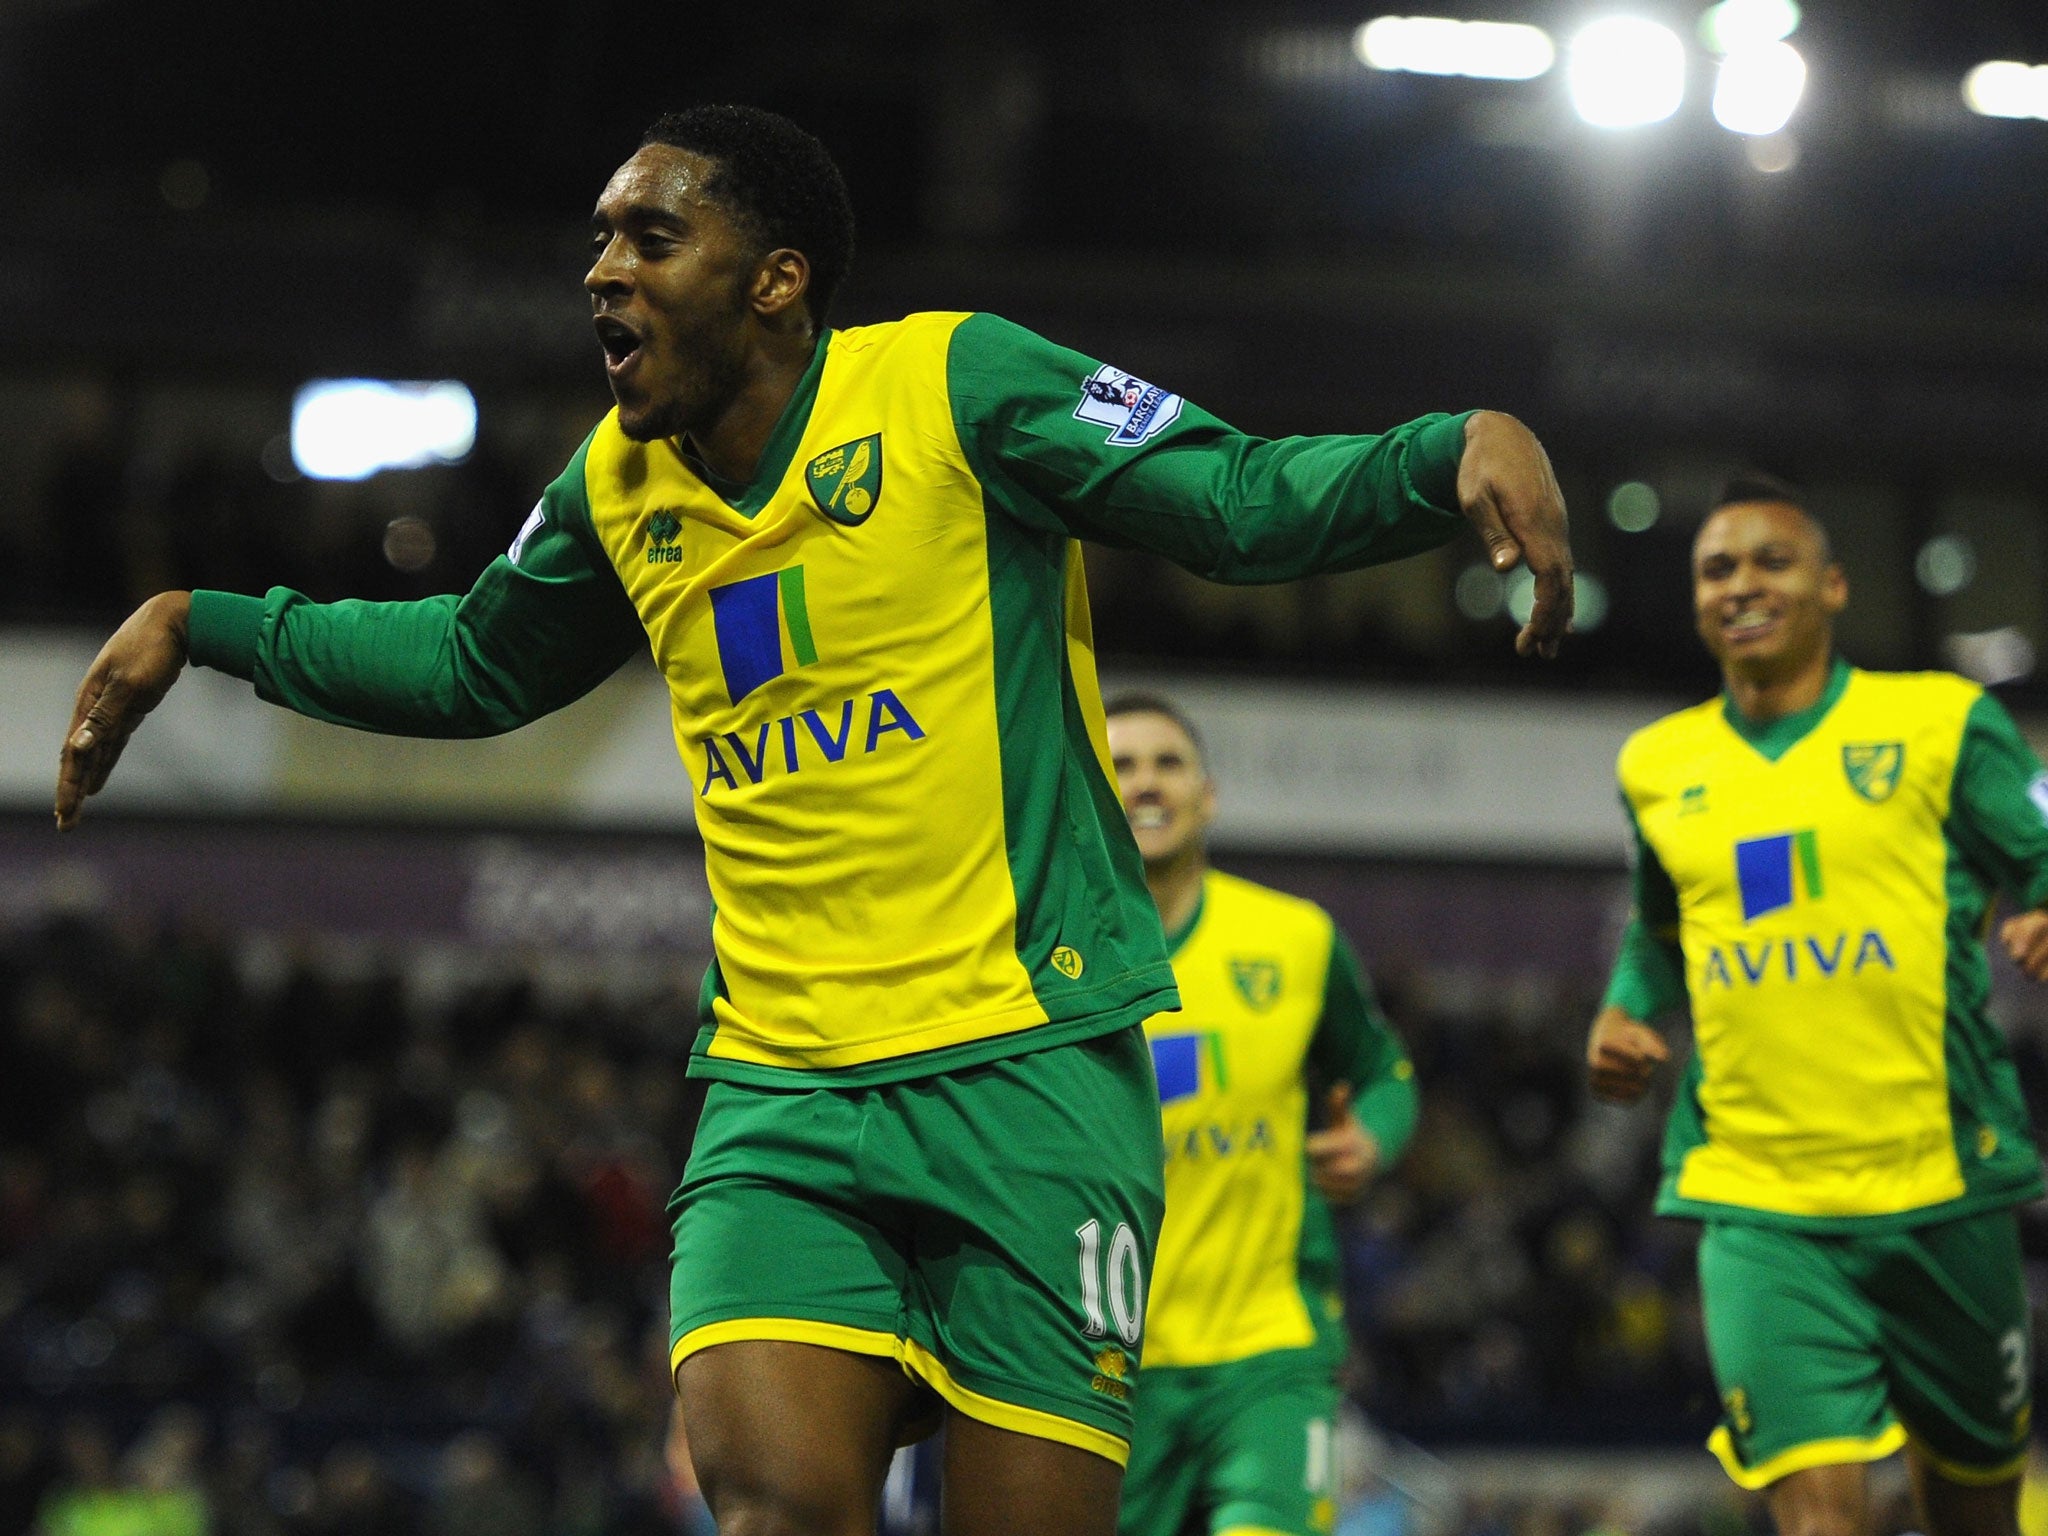 Norwich player Leroy Fer celebrates after scoring the second goal